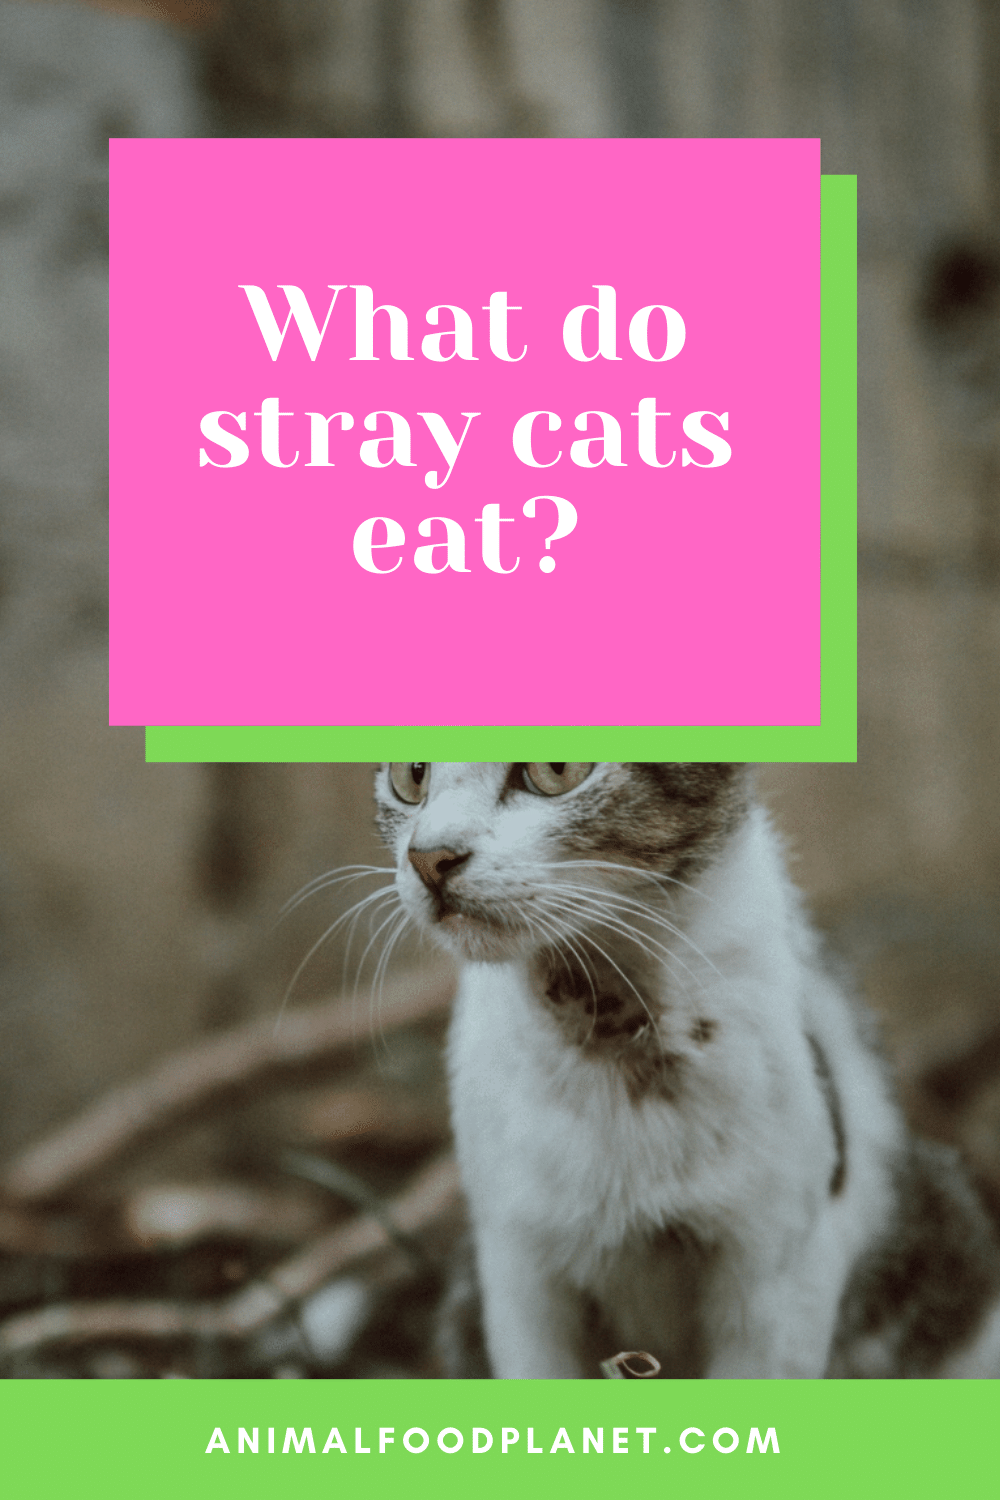 What Do Stray Cats Eat?